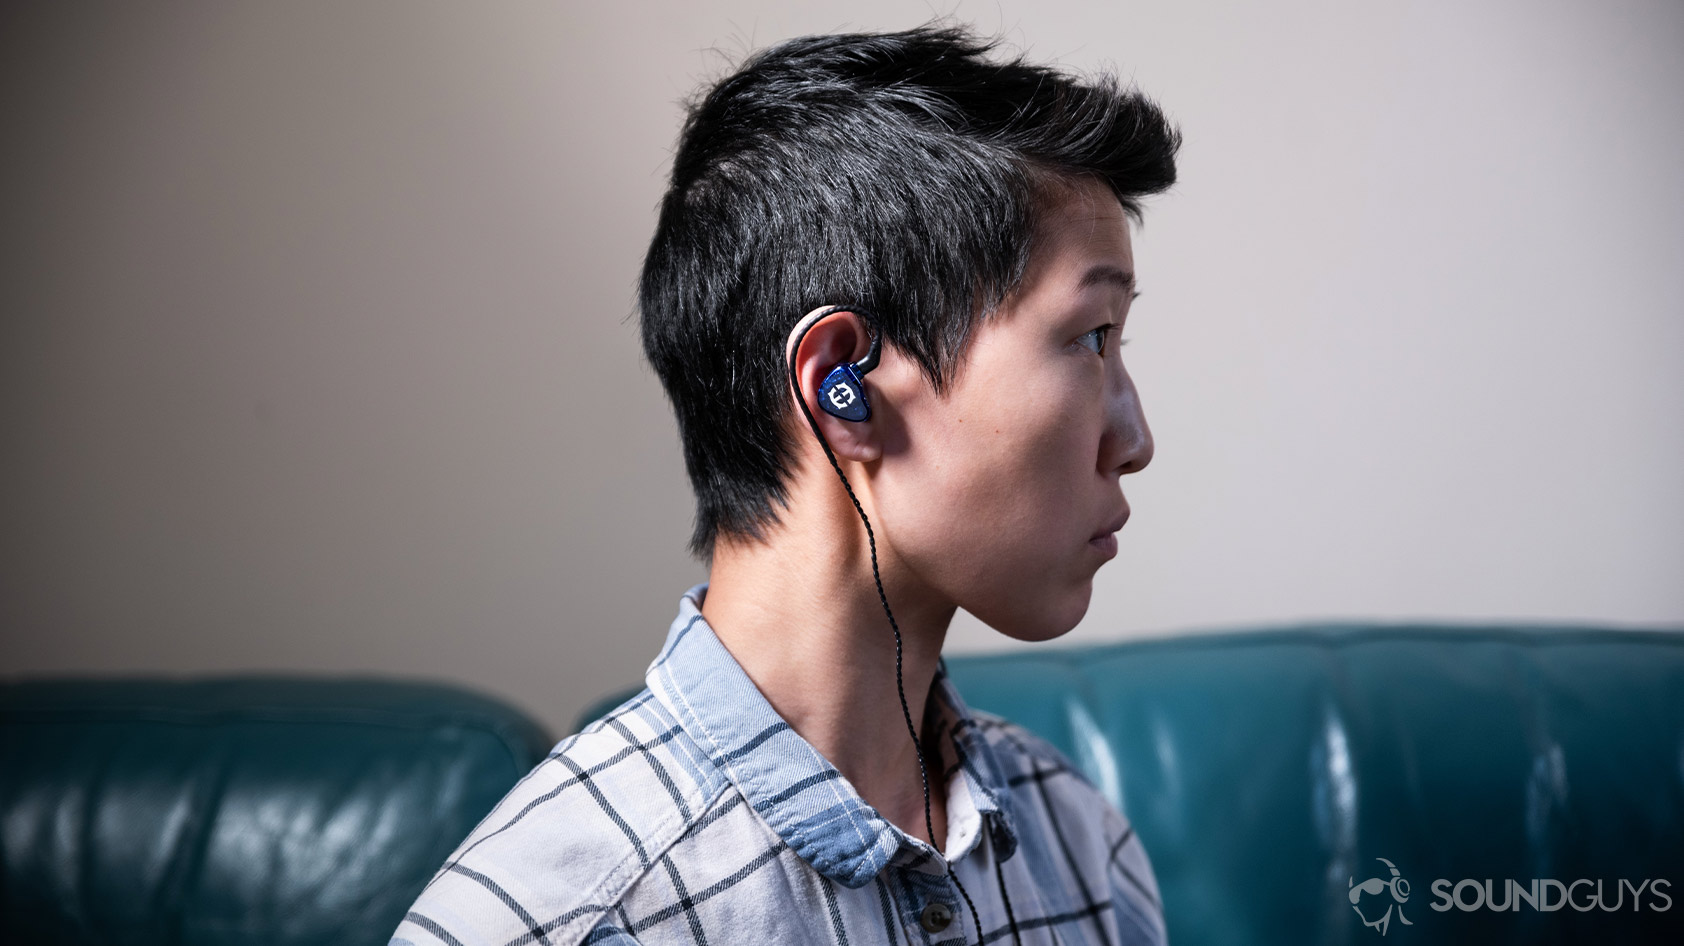 A photo of the Massdrop x Empire Ears Zeus earbuds being worn by a woman looking to the right of the frame.